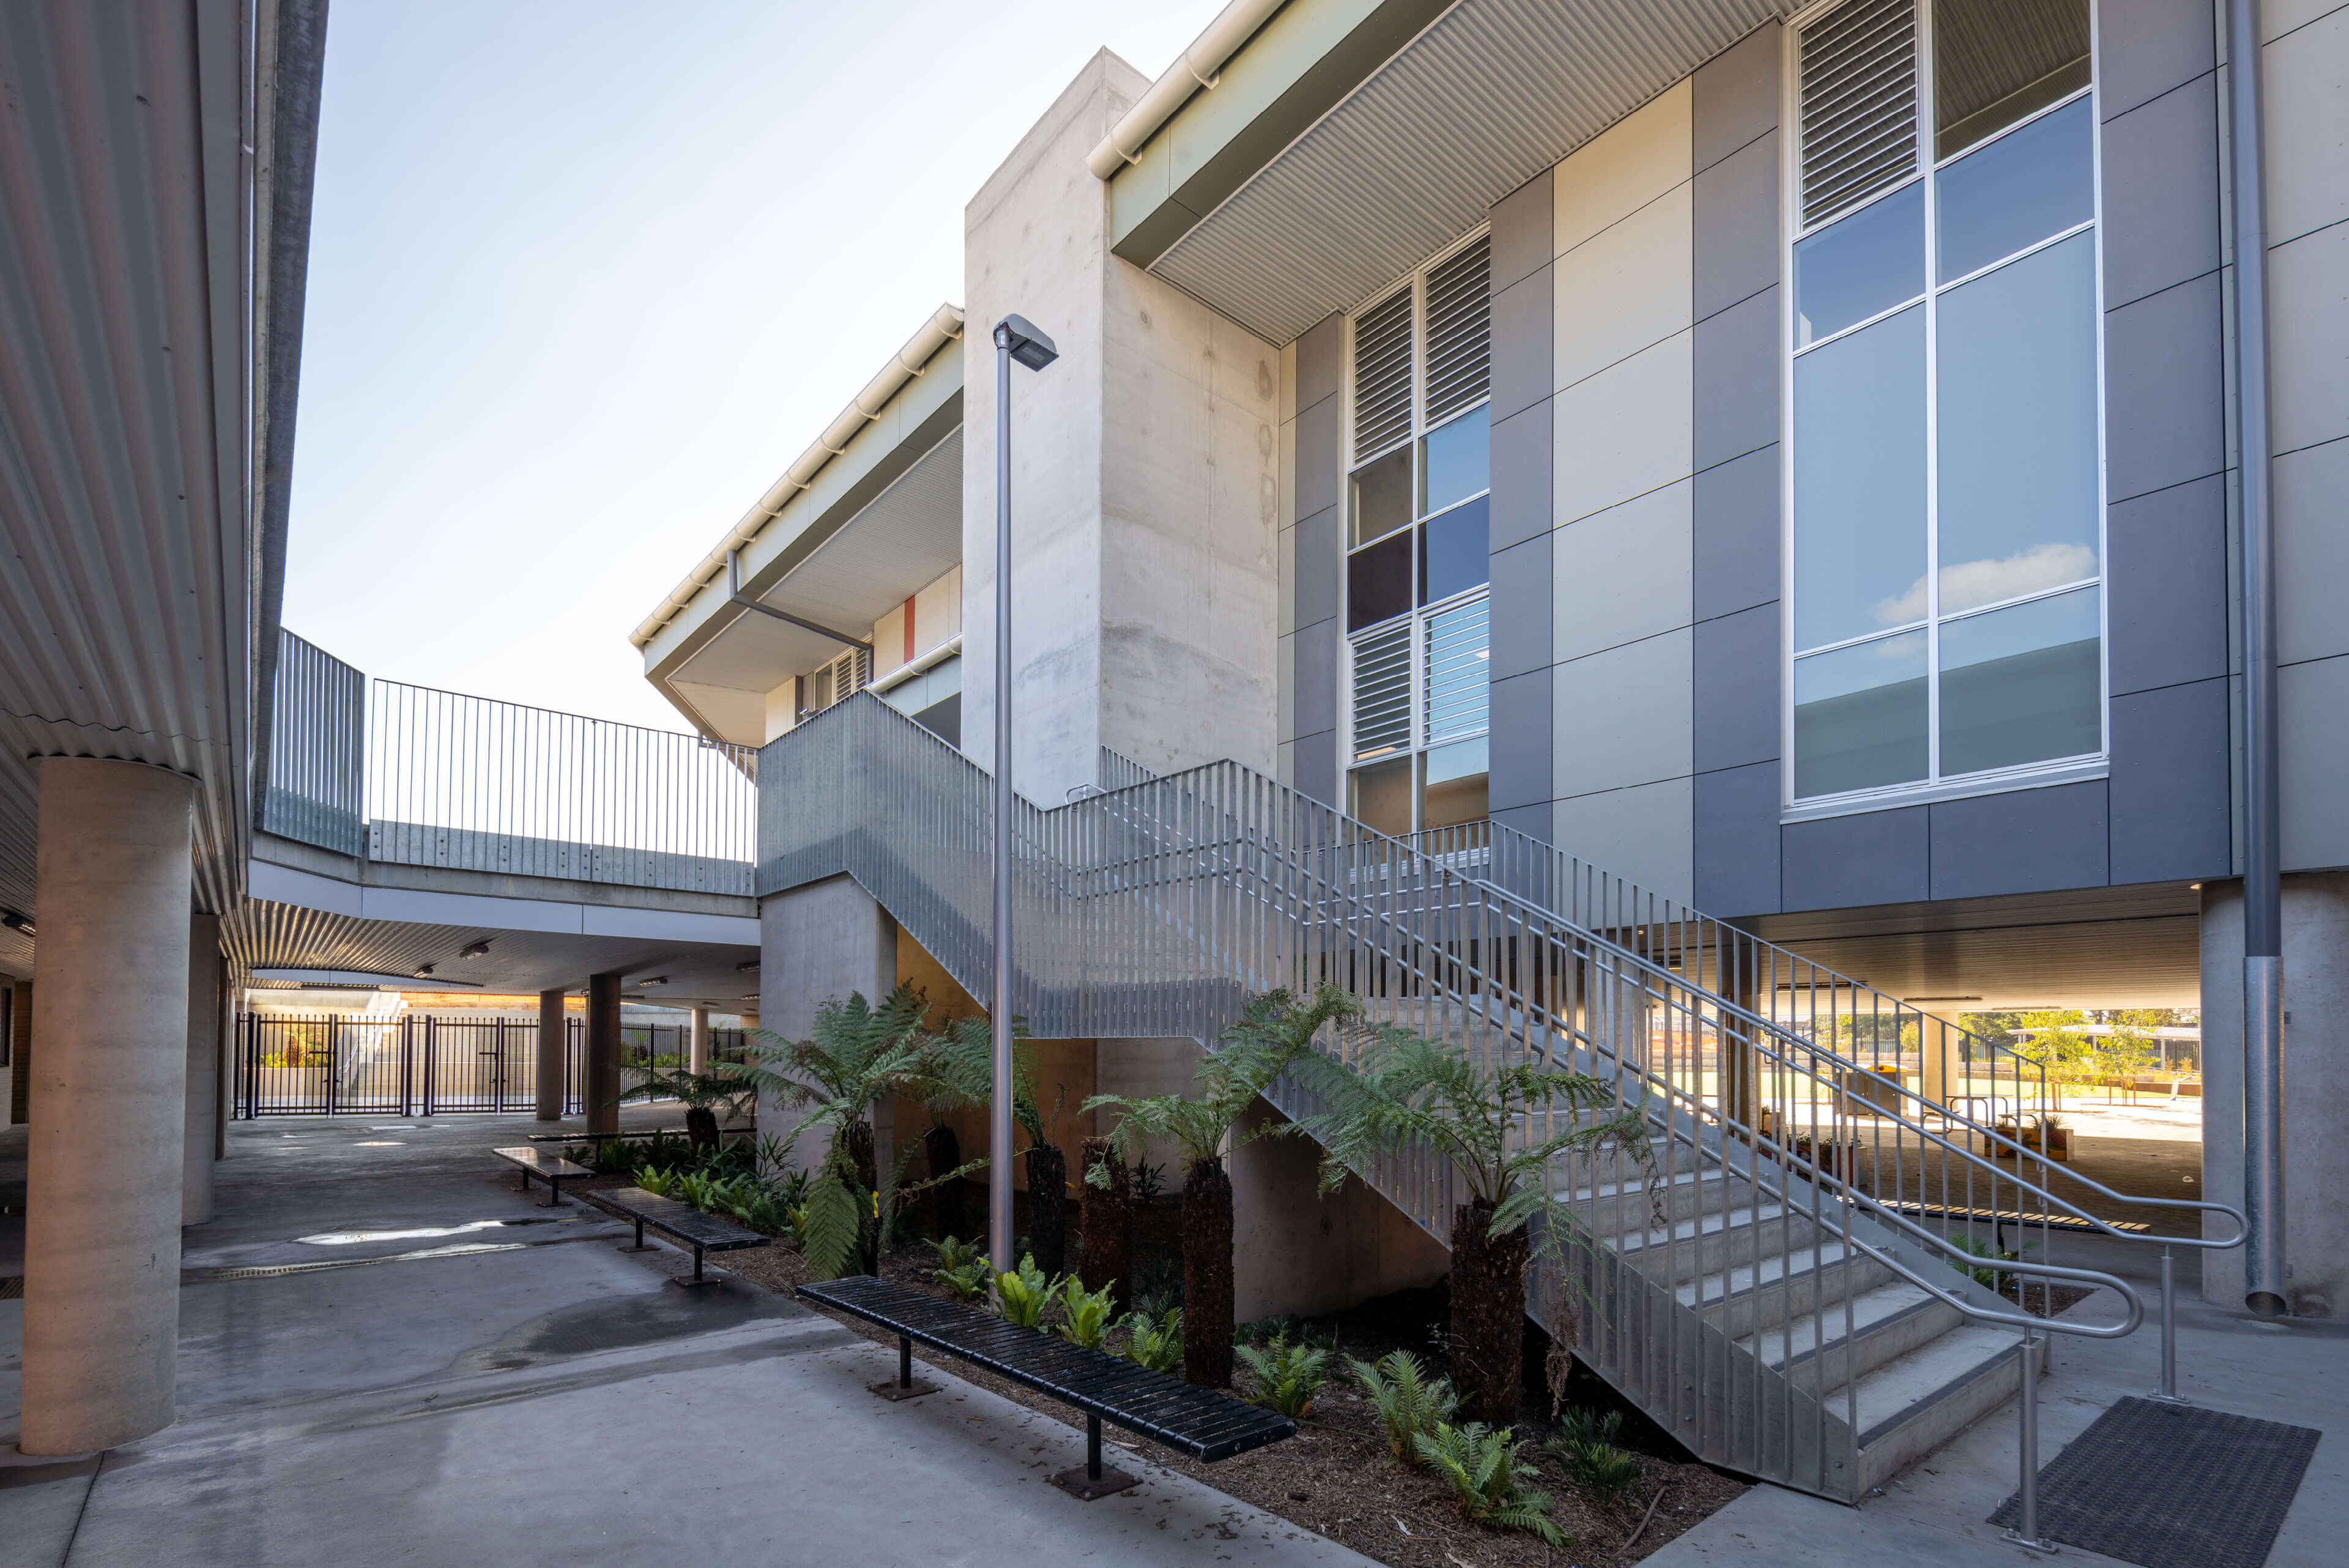 3 exterior stairs picton high school development taylor construction education